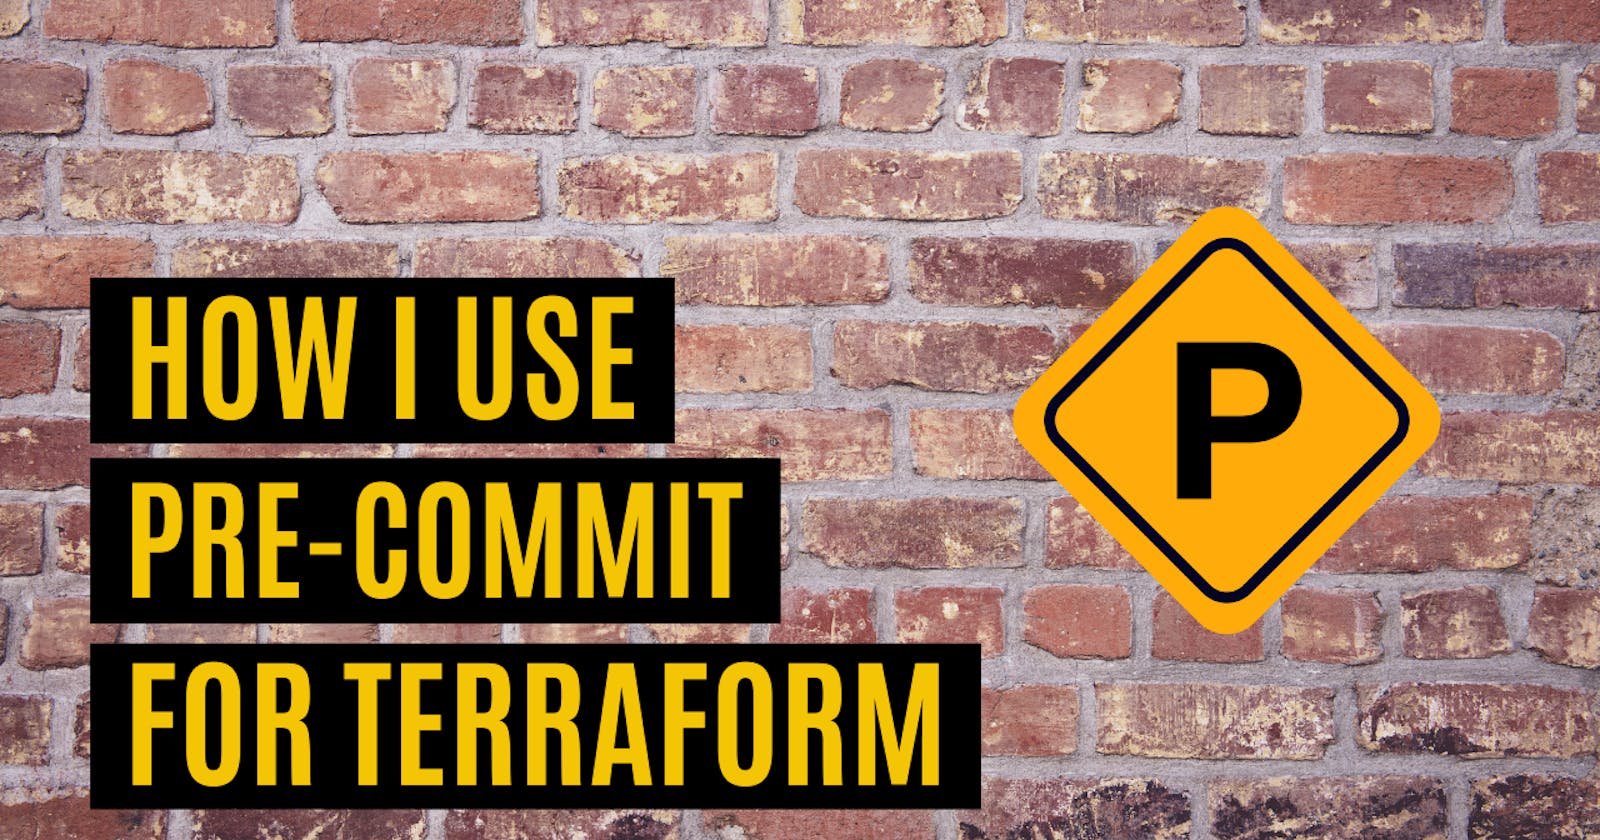 How I use pre-commit for Terraform